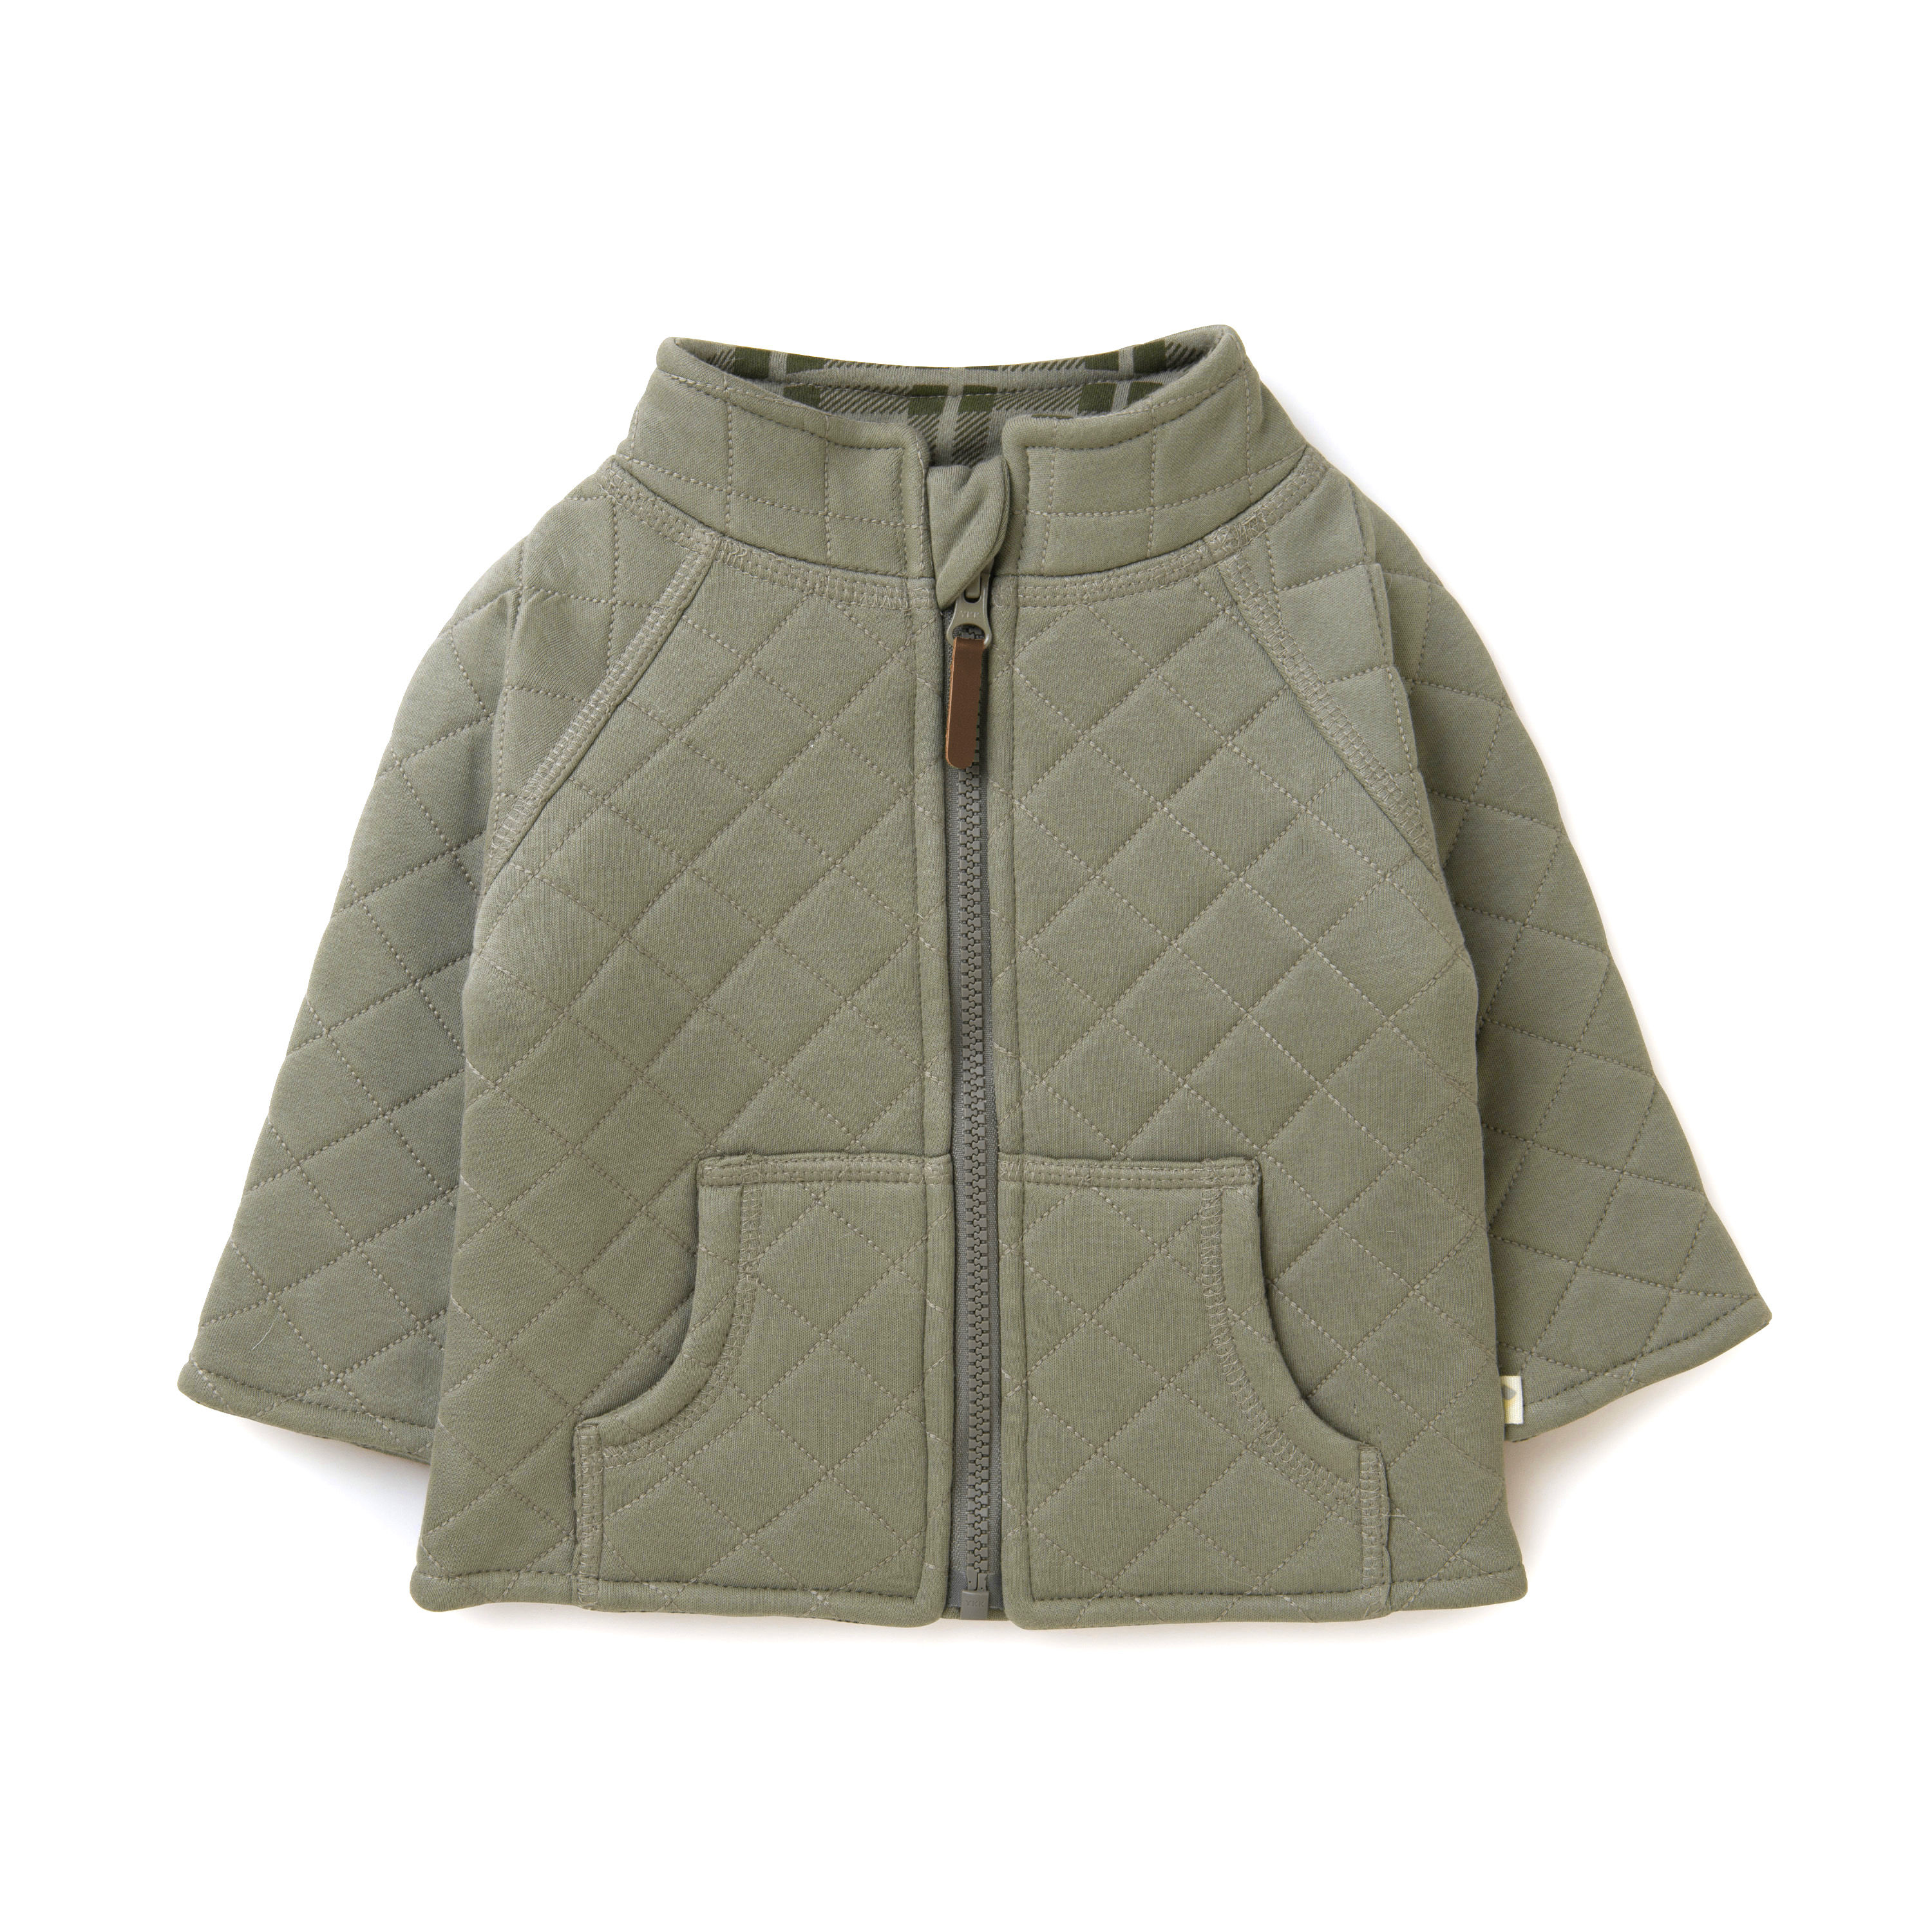 A Organic Kids olive green quilted jacket with a high collar and front zipper, displayed against a white background. The jacket has two visible front pockets.